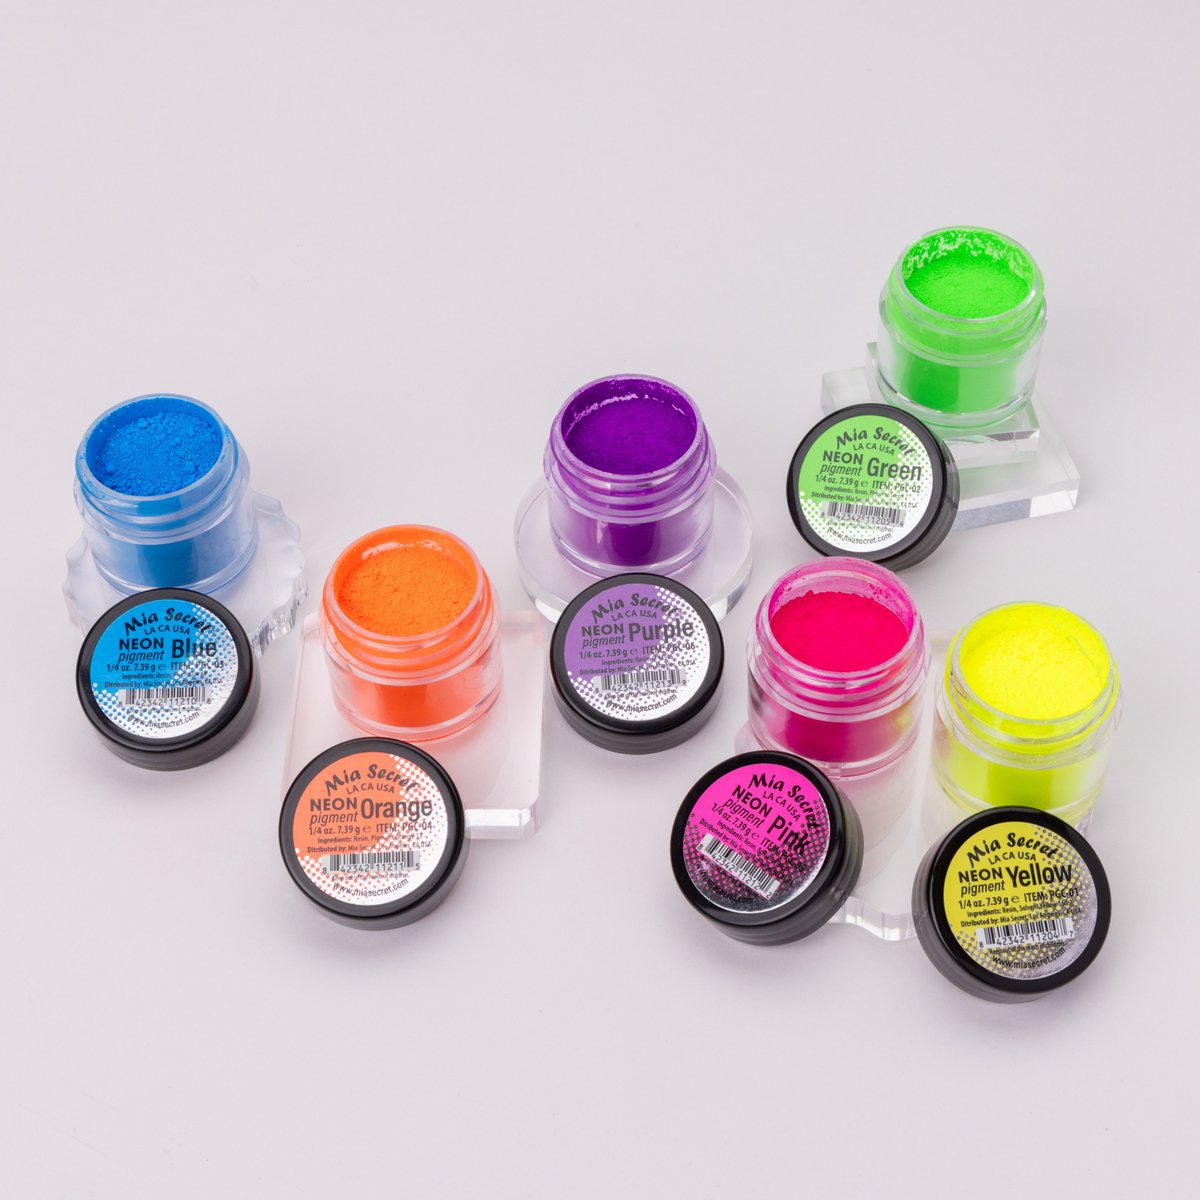 Can't decide which shockingly bright neon hue to use? 🌟 Why not try them all? Our Neon Pigments have a super rich color payoff so your designs will truly be blinding!

miasecretstore.com

#miasecret #summernails #nailartpigment #nailart #neonnails